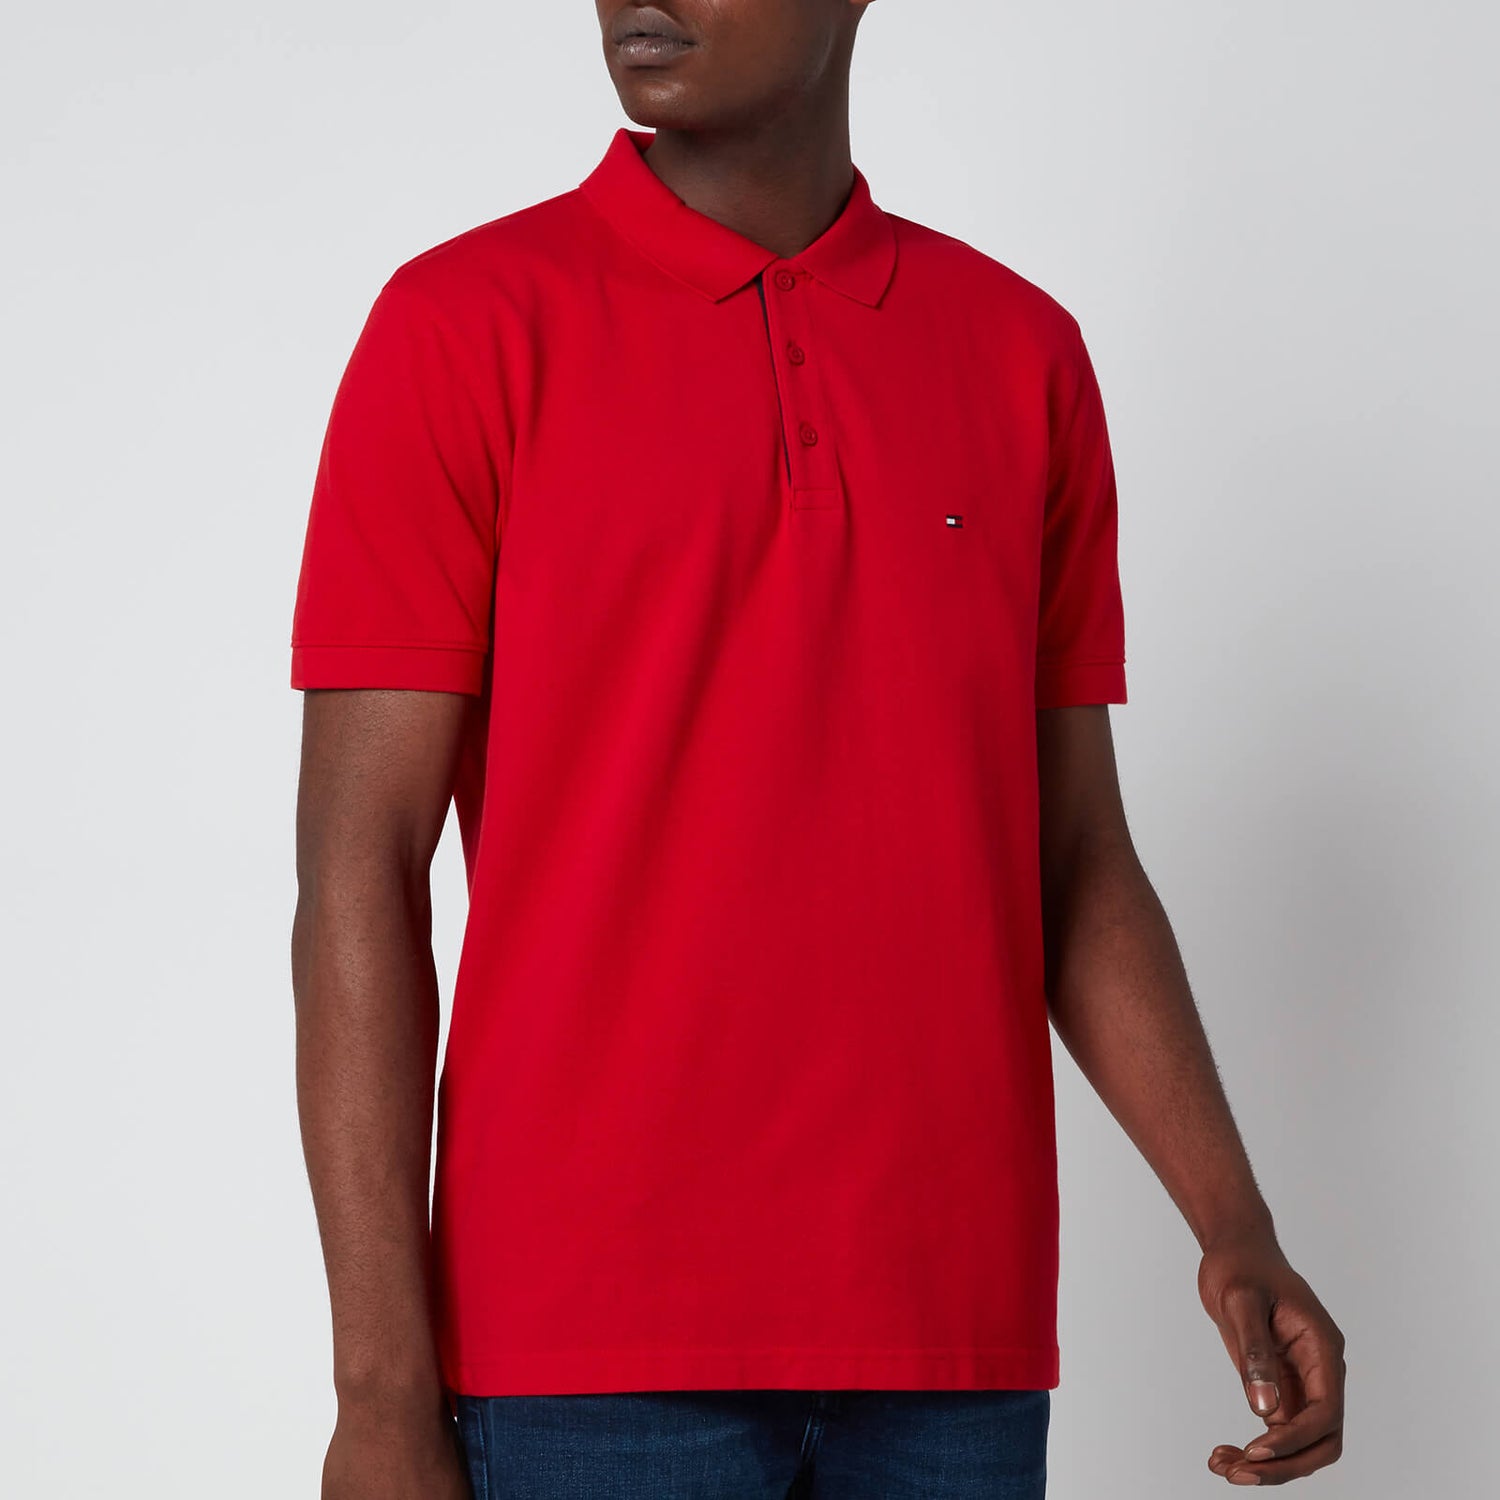 Tommy Hilfiger Men's Contrast Placket Polo Shirt - Primary Red